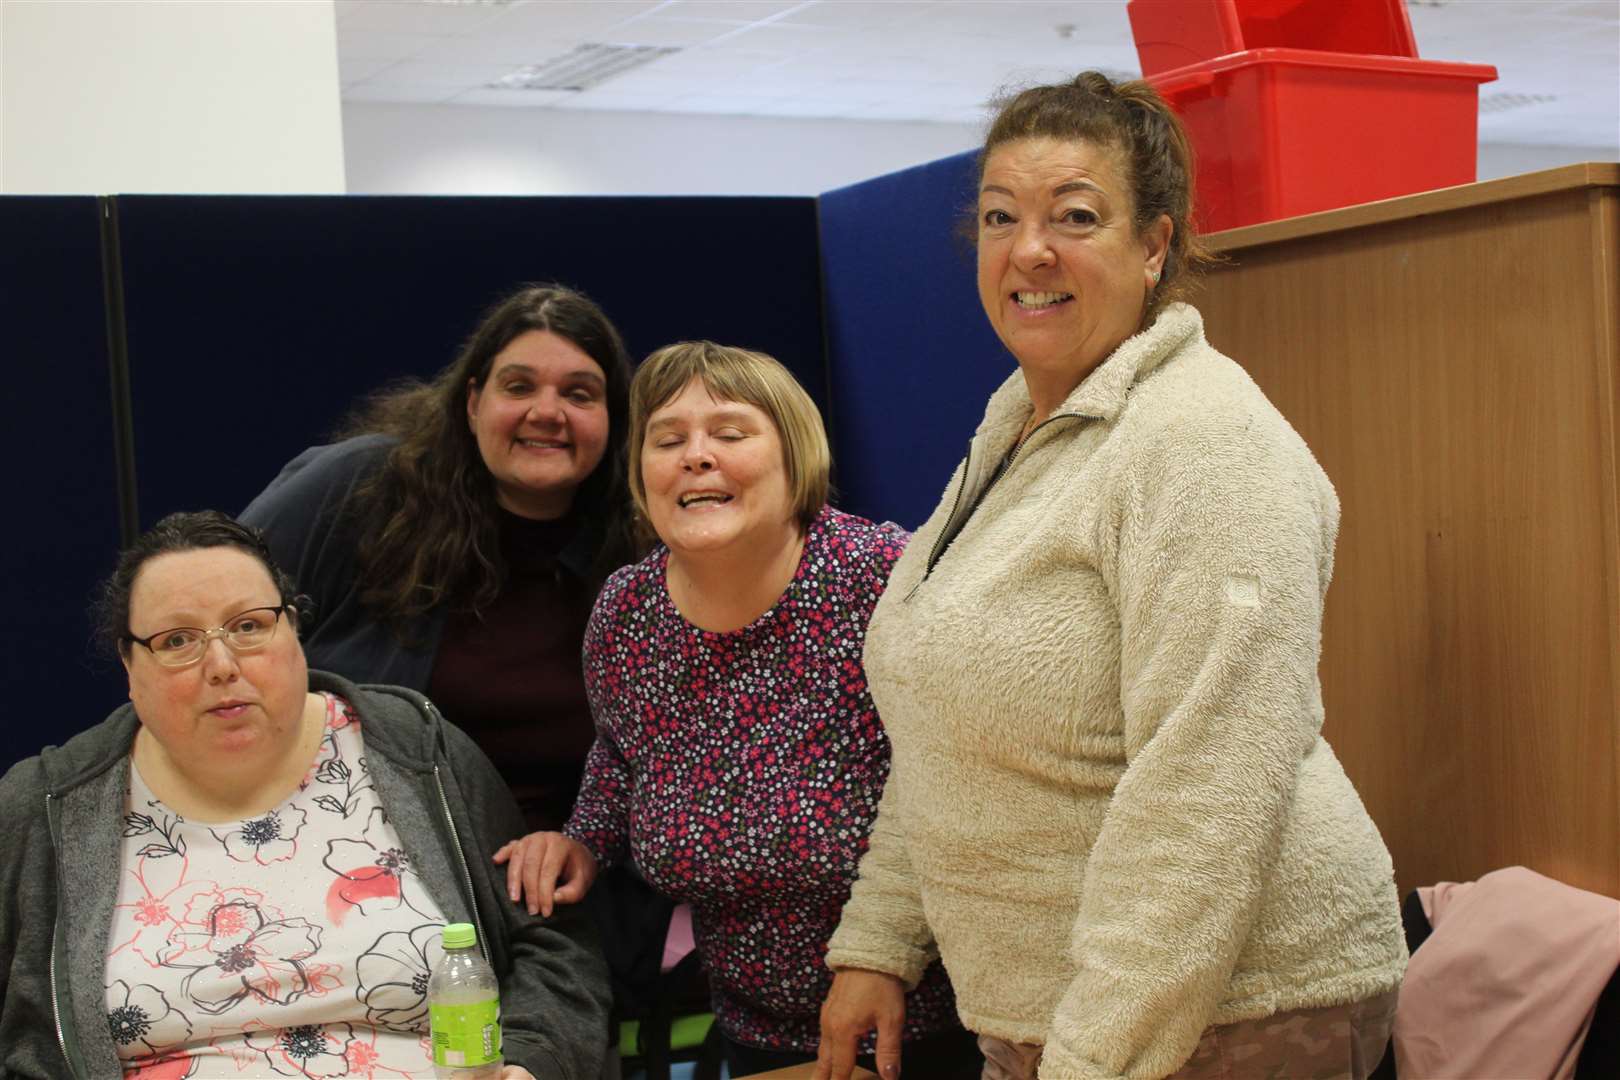 GO Green cafe participants (left) Emma Rennie, Natalie Naylor, Helen Sutherland, Tracy Harrision at this week's gathering at Grampian Opportunities premises, West High Street, Inverurie. Picture: Griselda McGregor